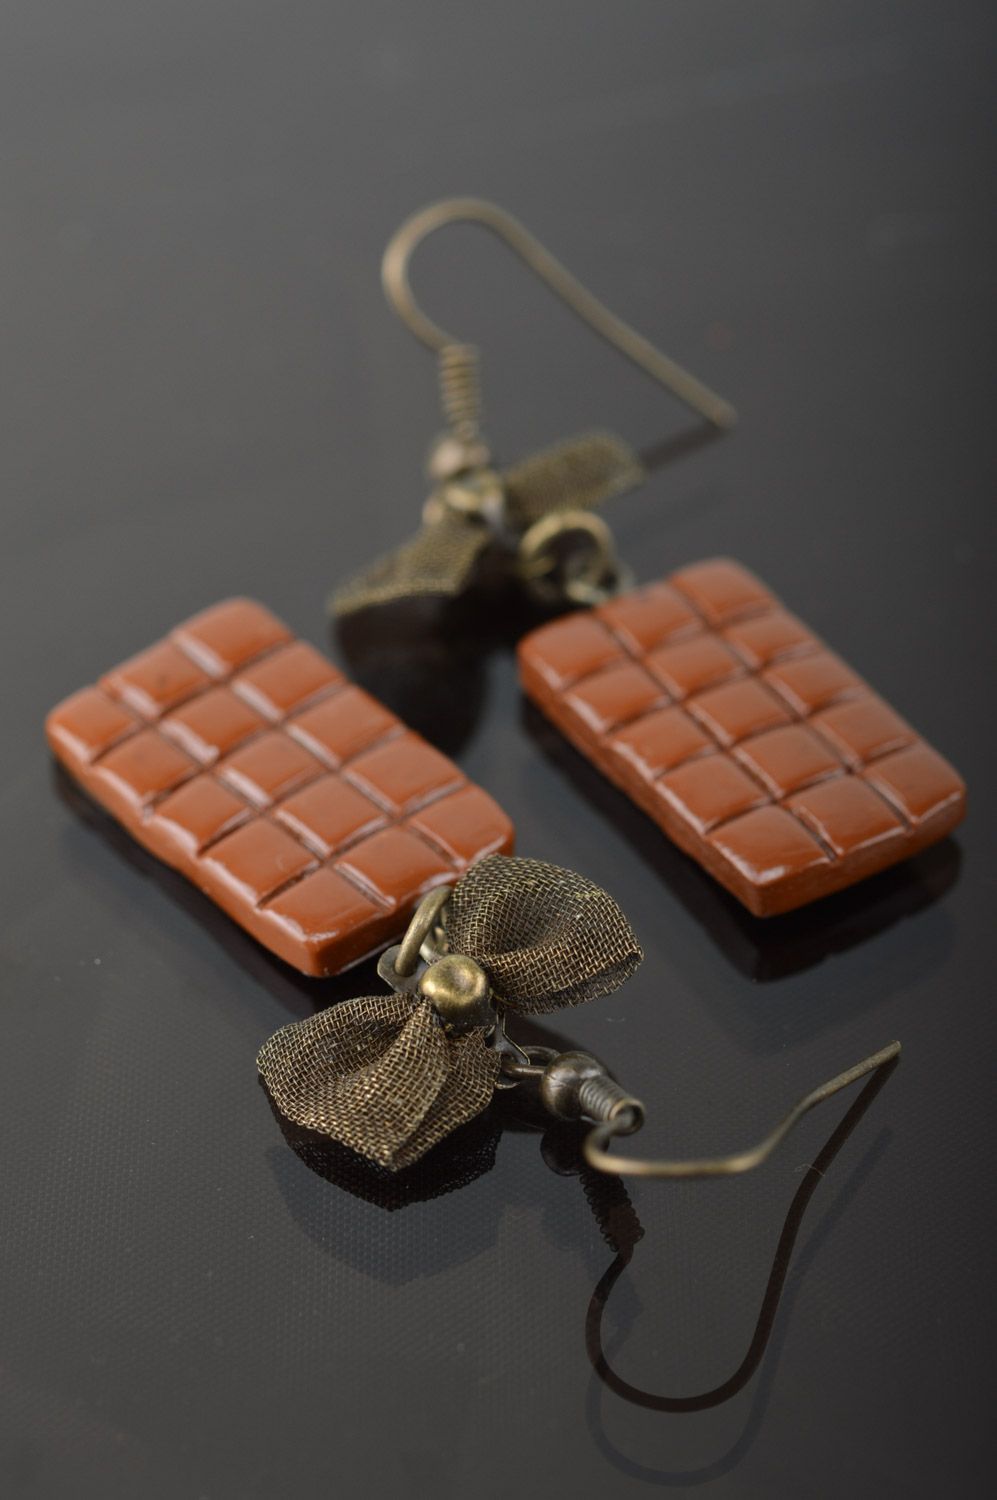 Homemade plastic earrings with charms in the shape of chocolate bars photo 1